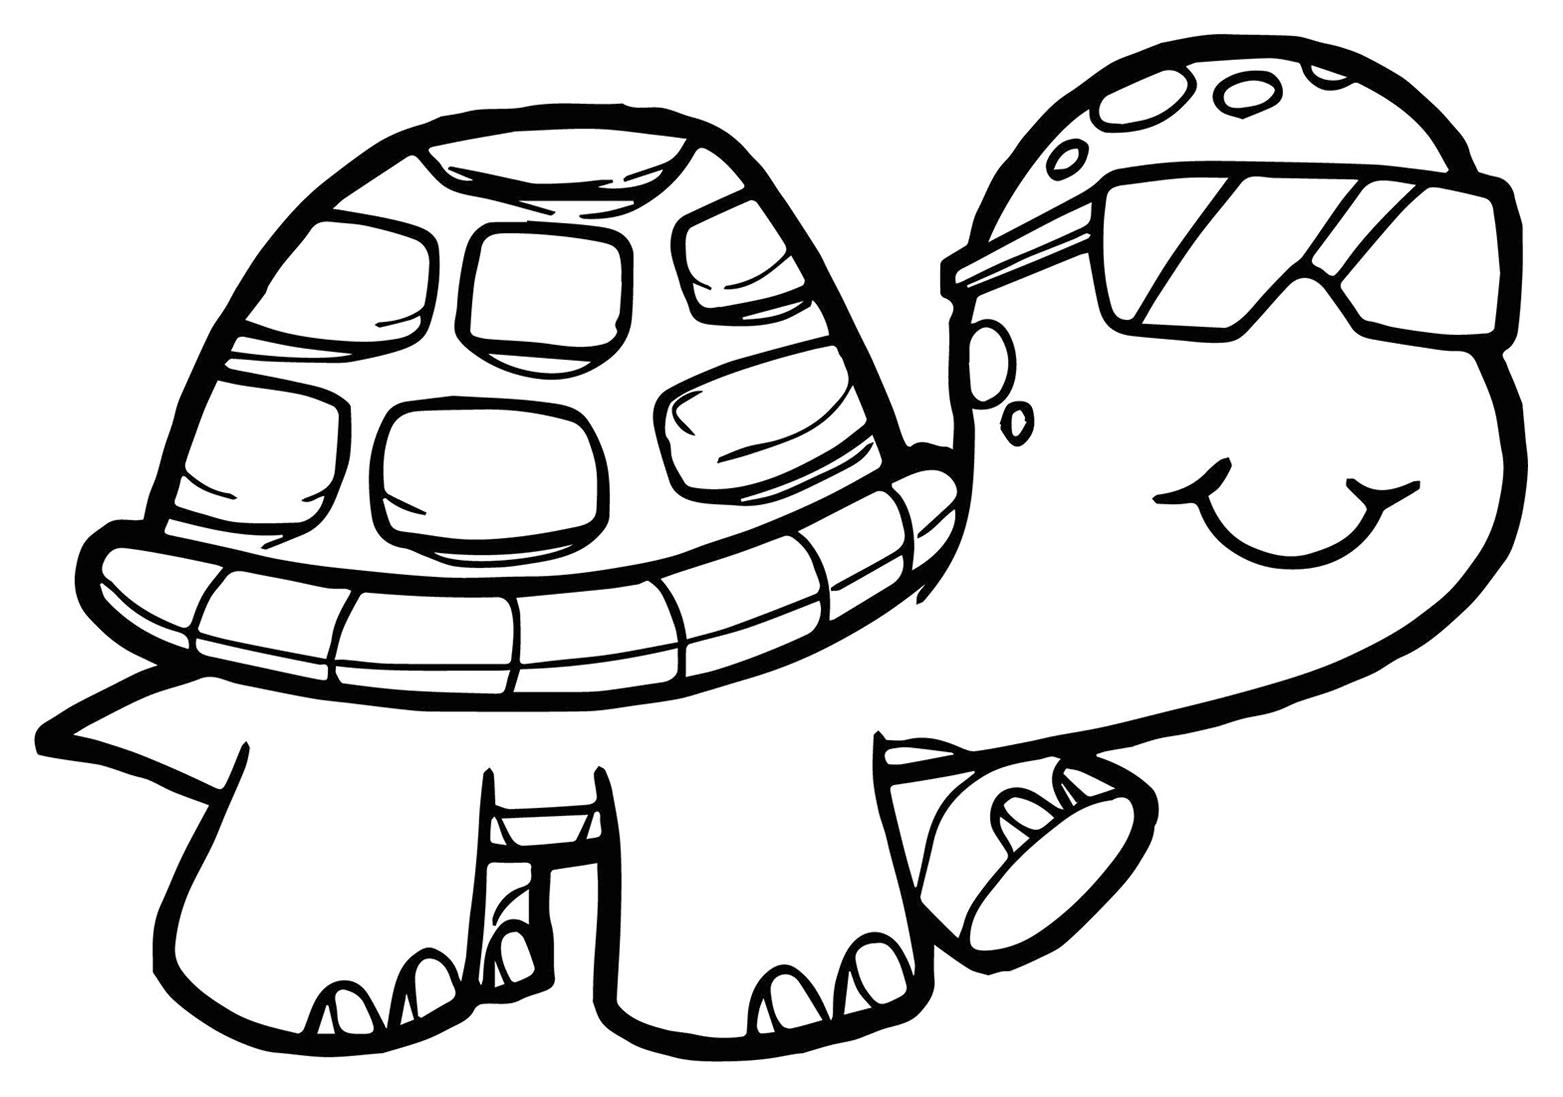 Turtle Coloring Pages For Kids
 Turtles to print for free Turtles Kids Coloring Pages